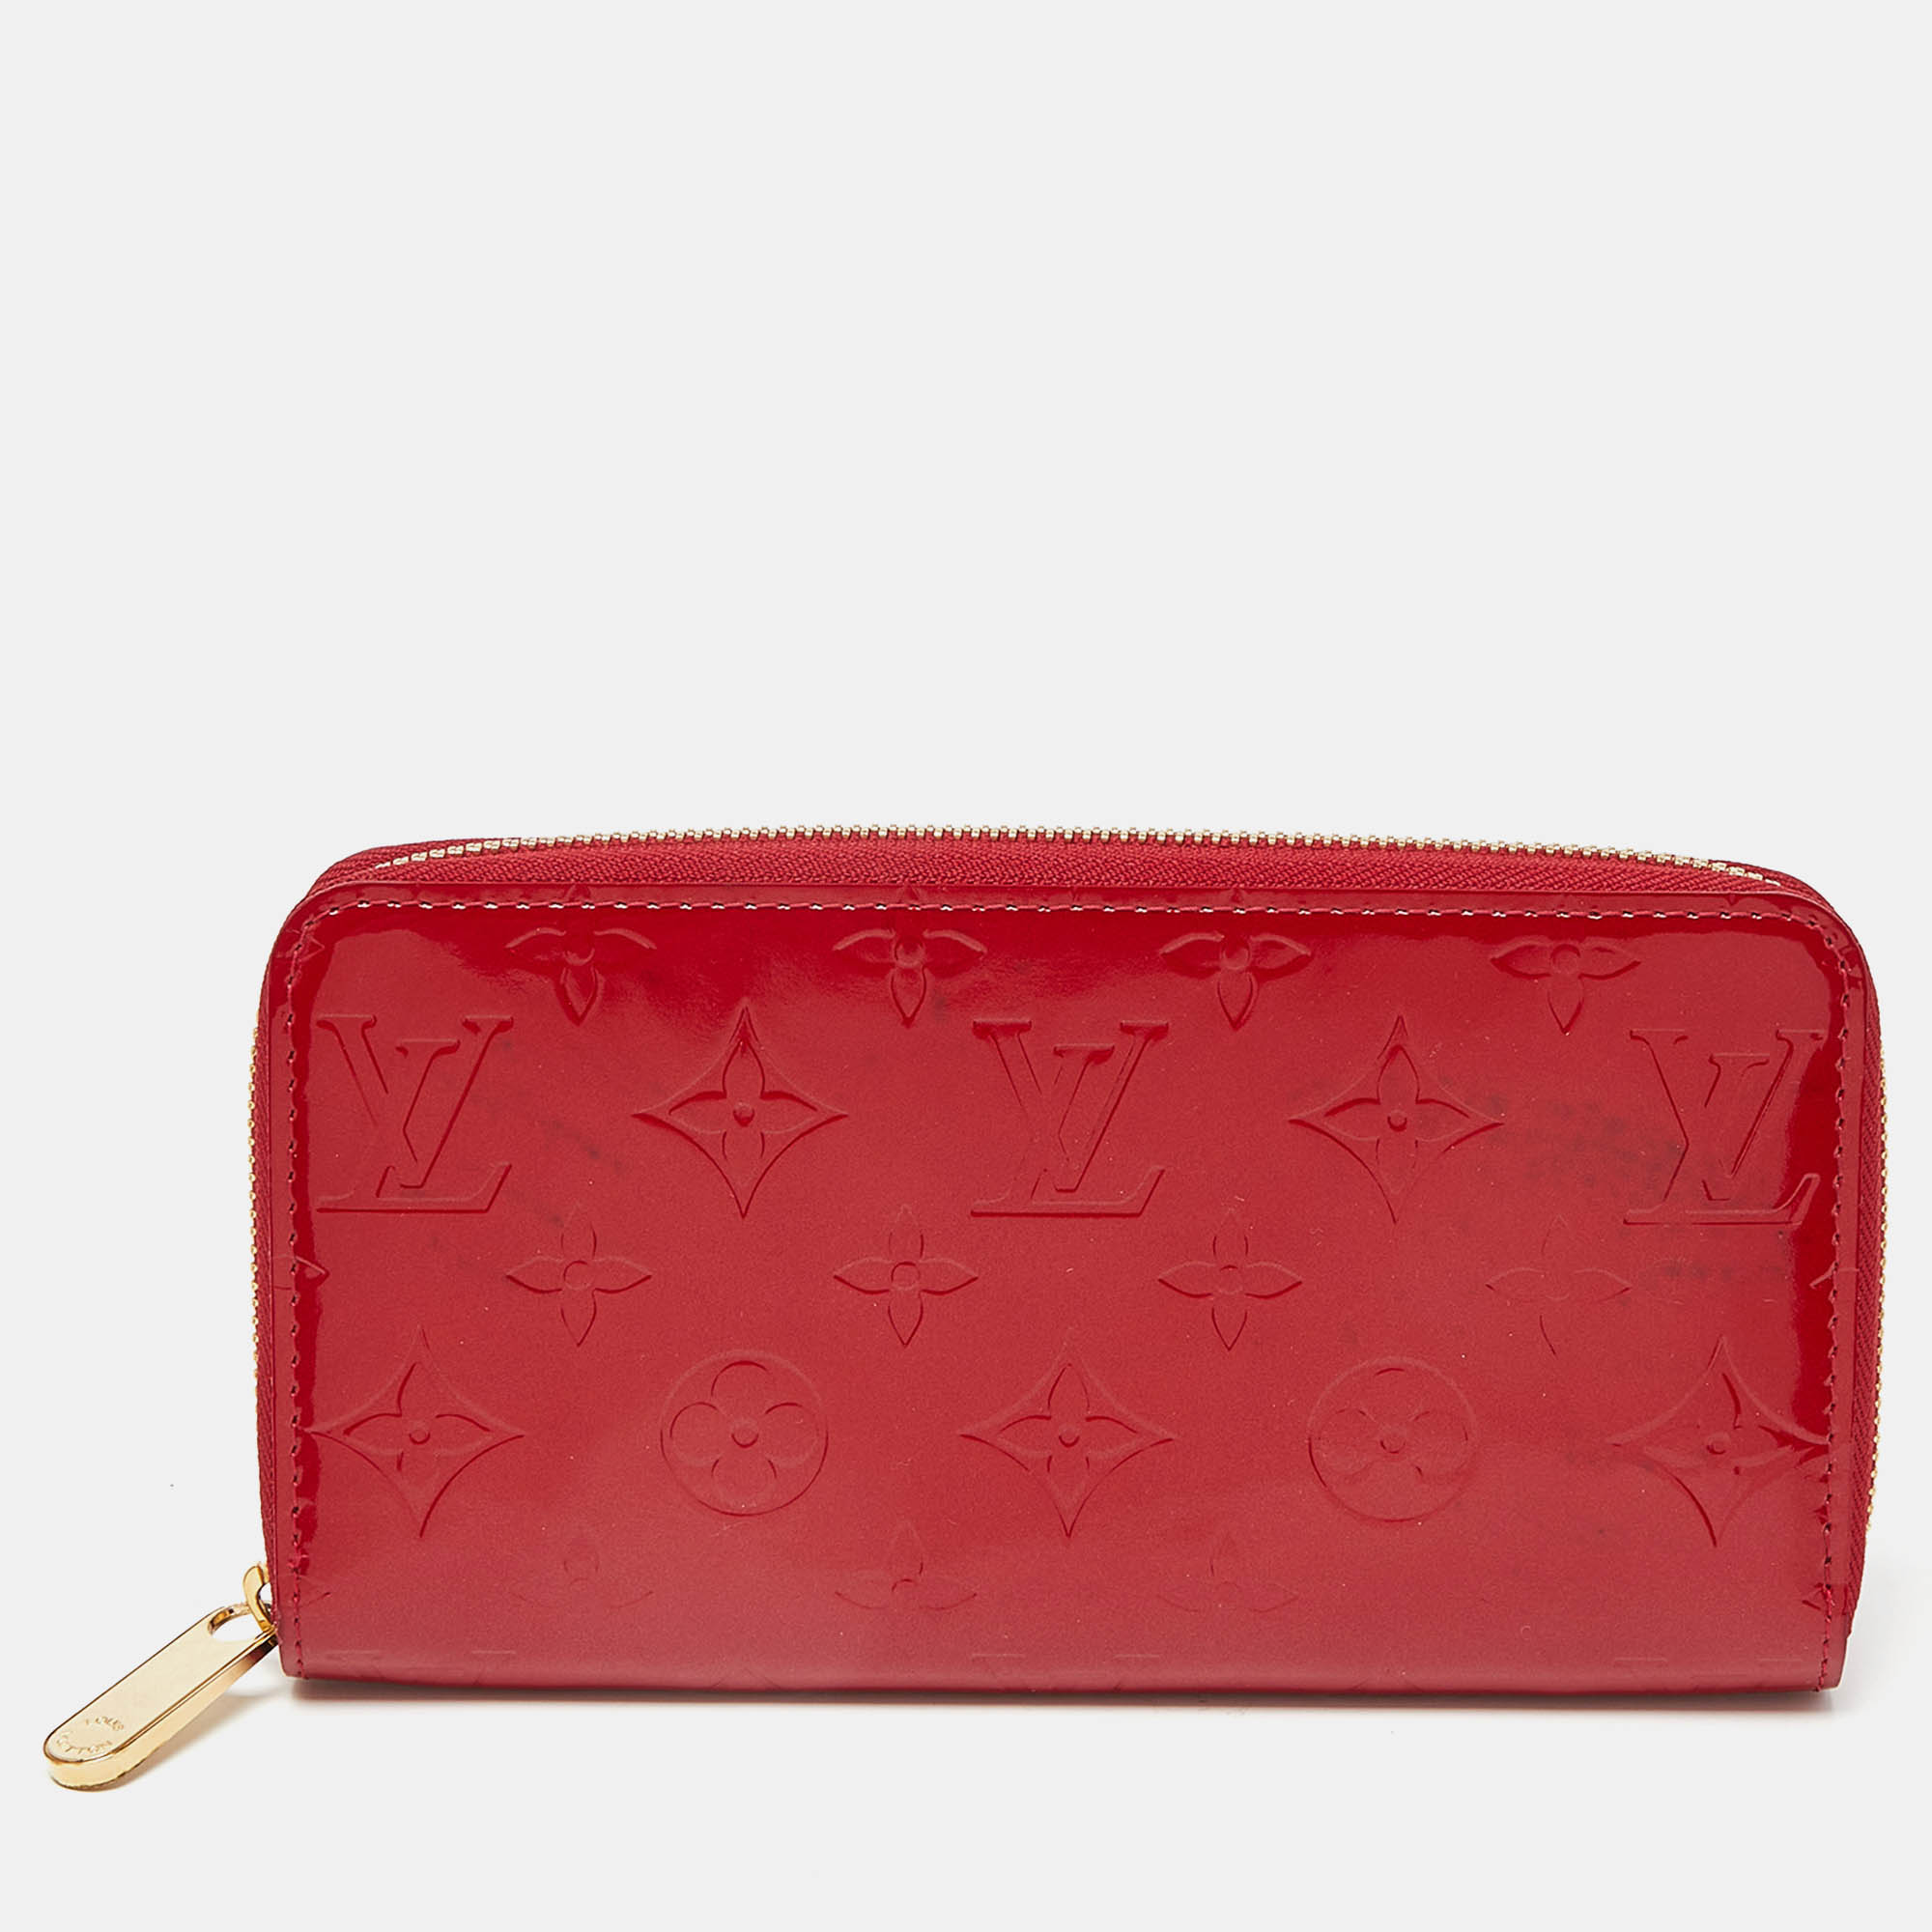 Pre-owned Louis Vuitton Pomme D'amour Monogram Vernis Zippy Wallet In Red